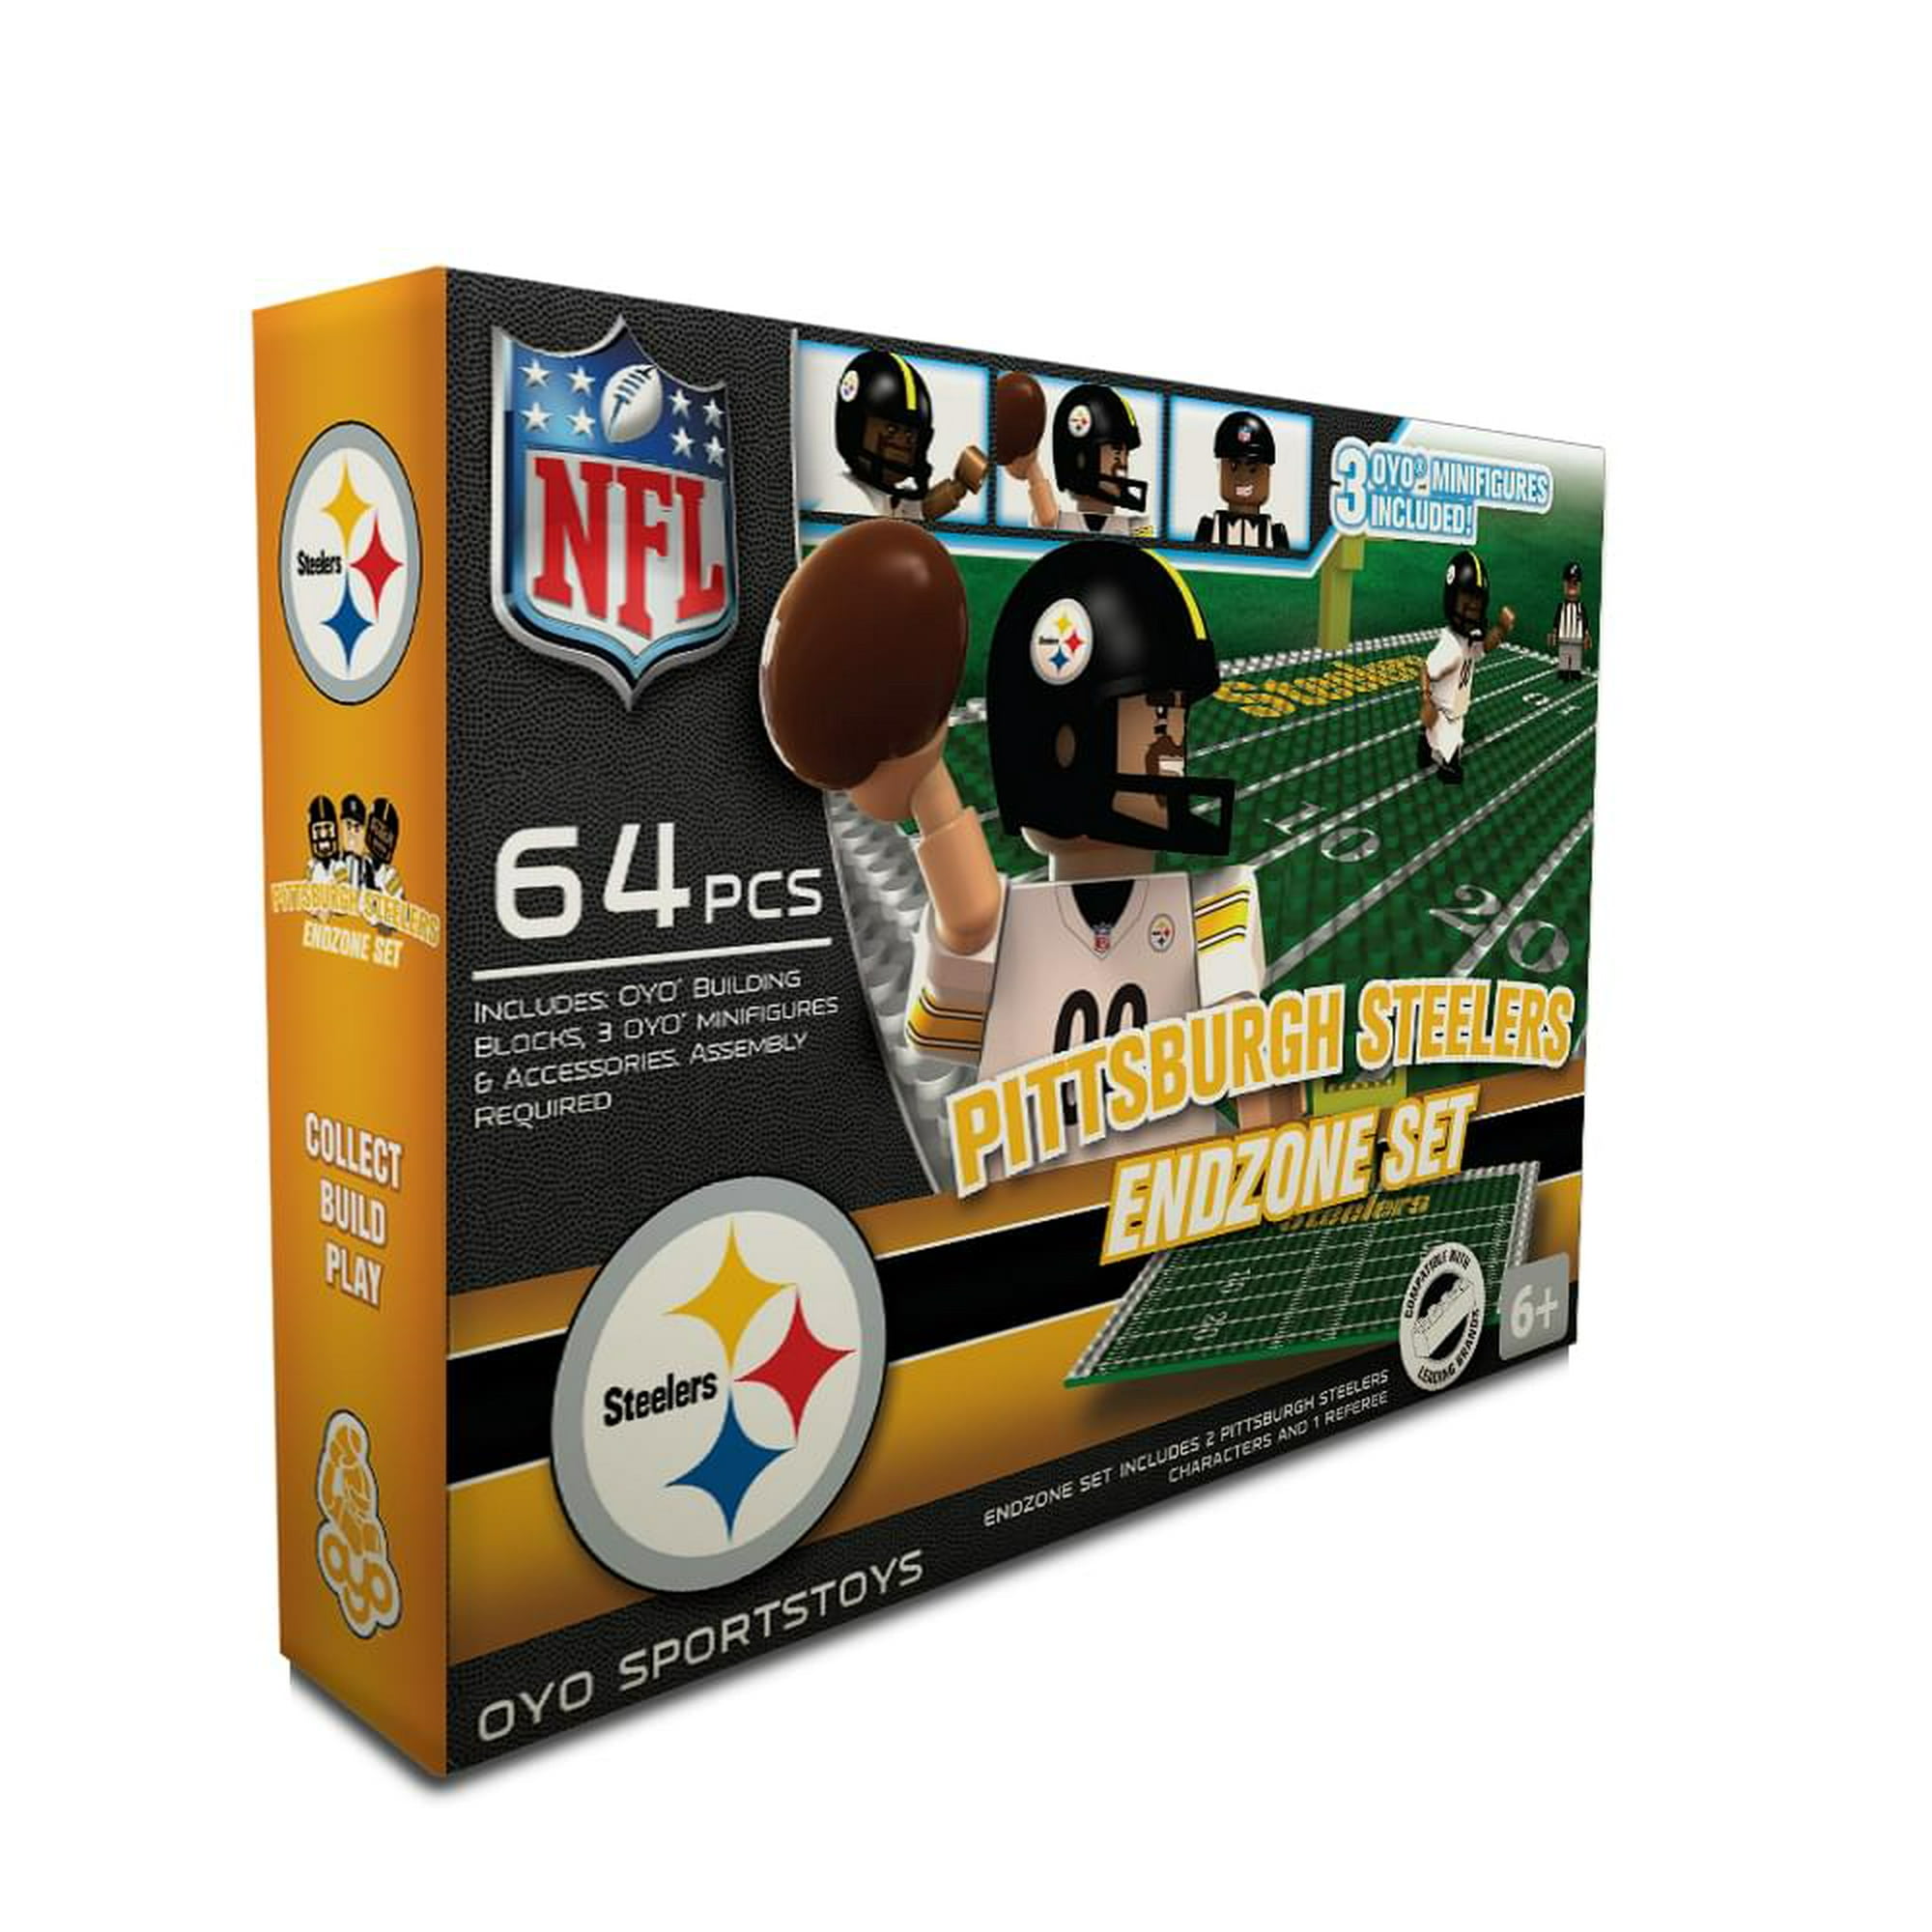 OYO Sports 64-Piece NFL End Zone Building Block Set, Pittsburgh Steelers 